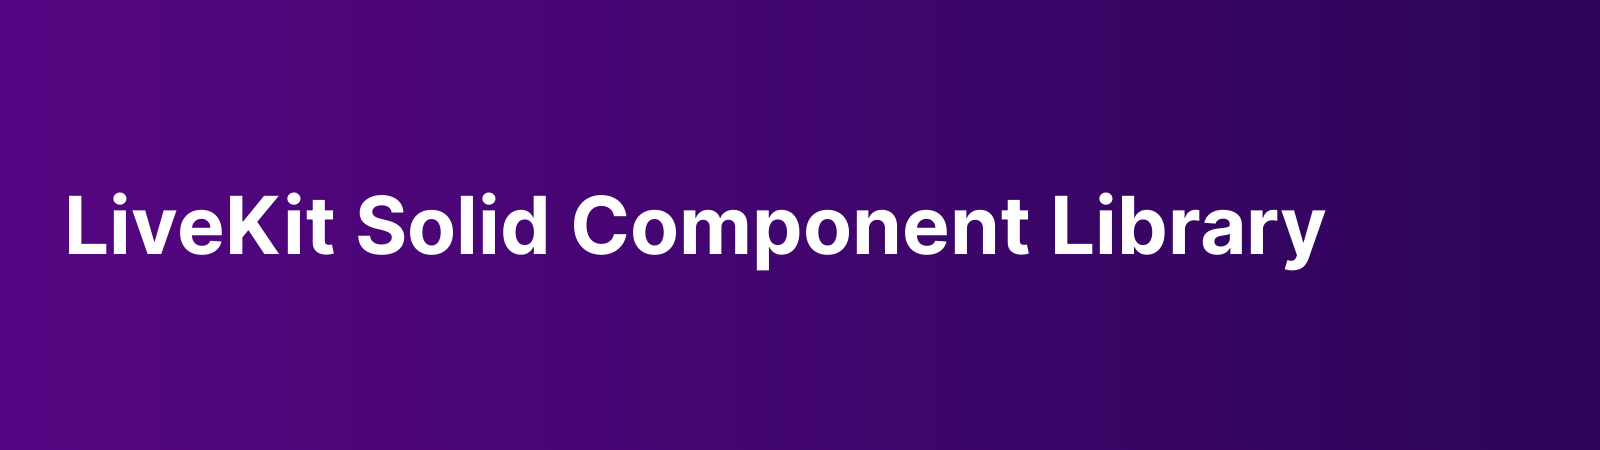 LiveKit Solid Component Library